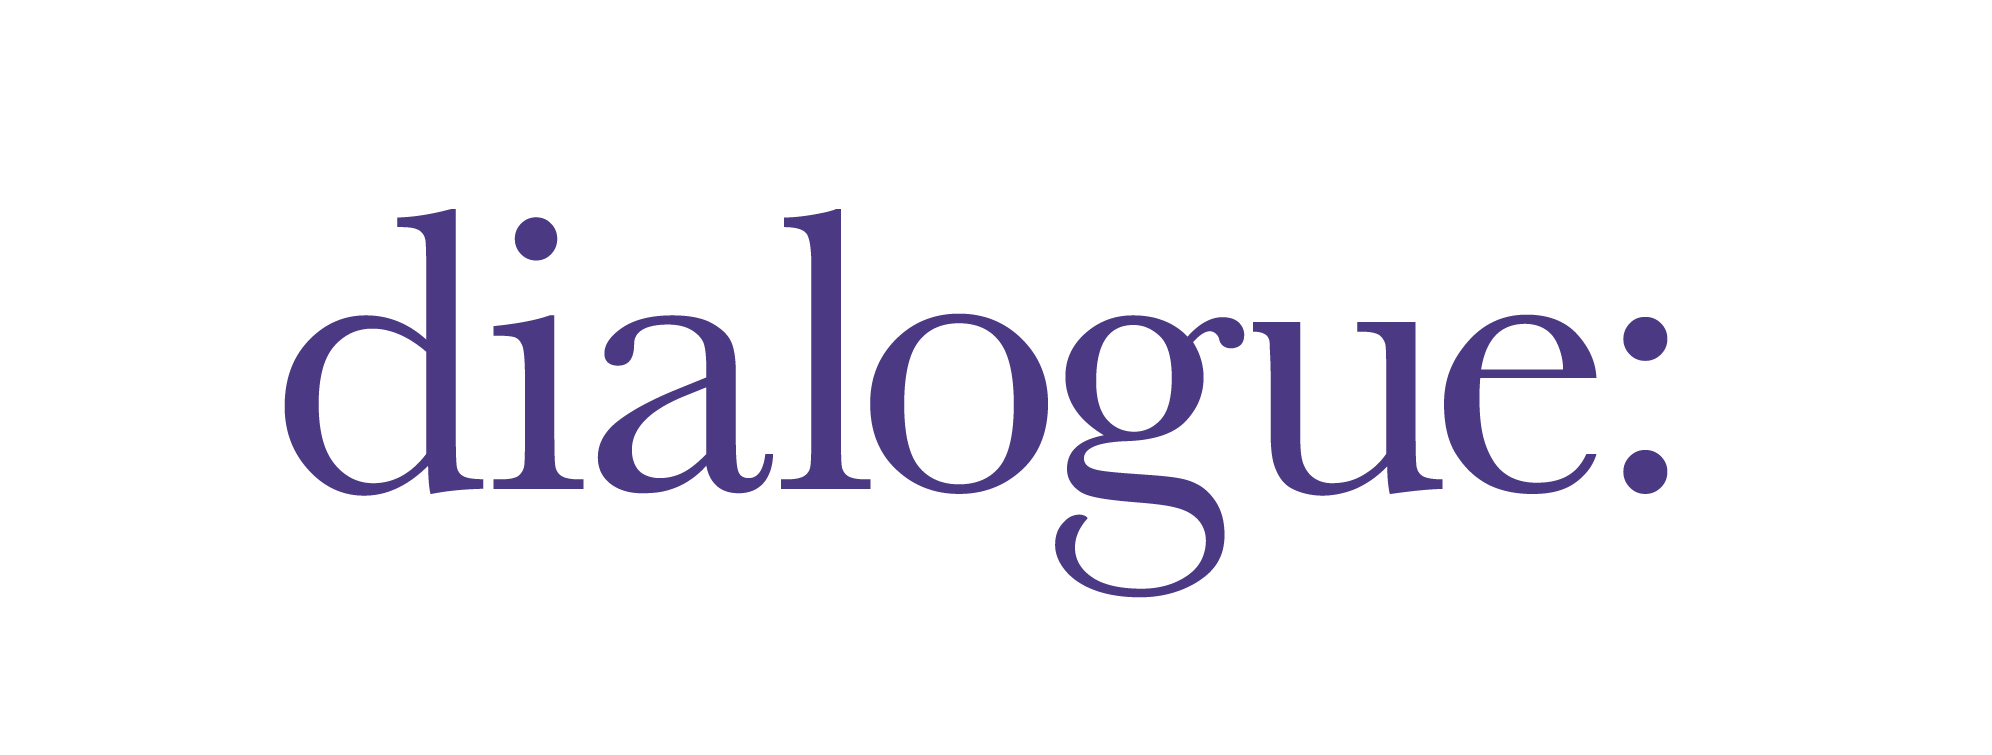 Dialogue engagement strategy agency